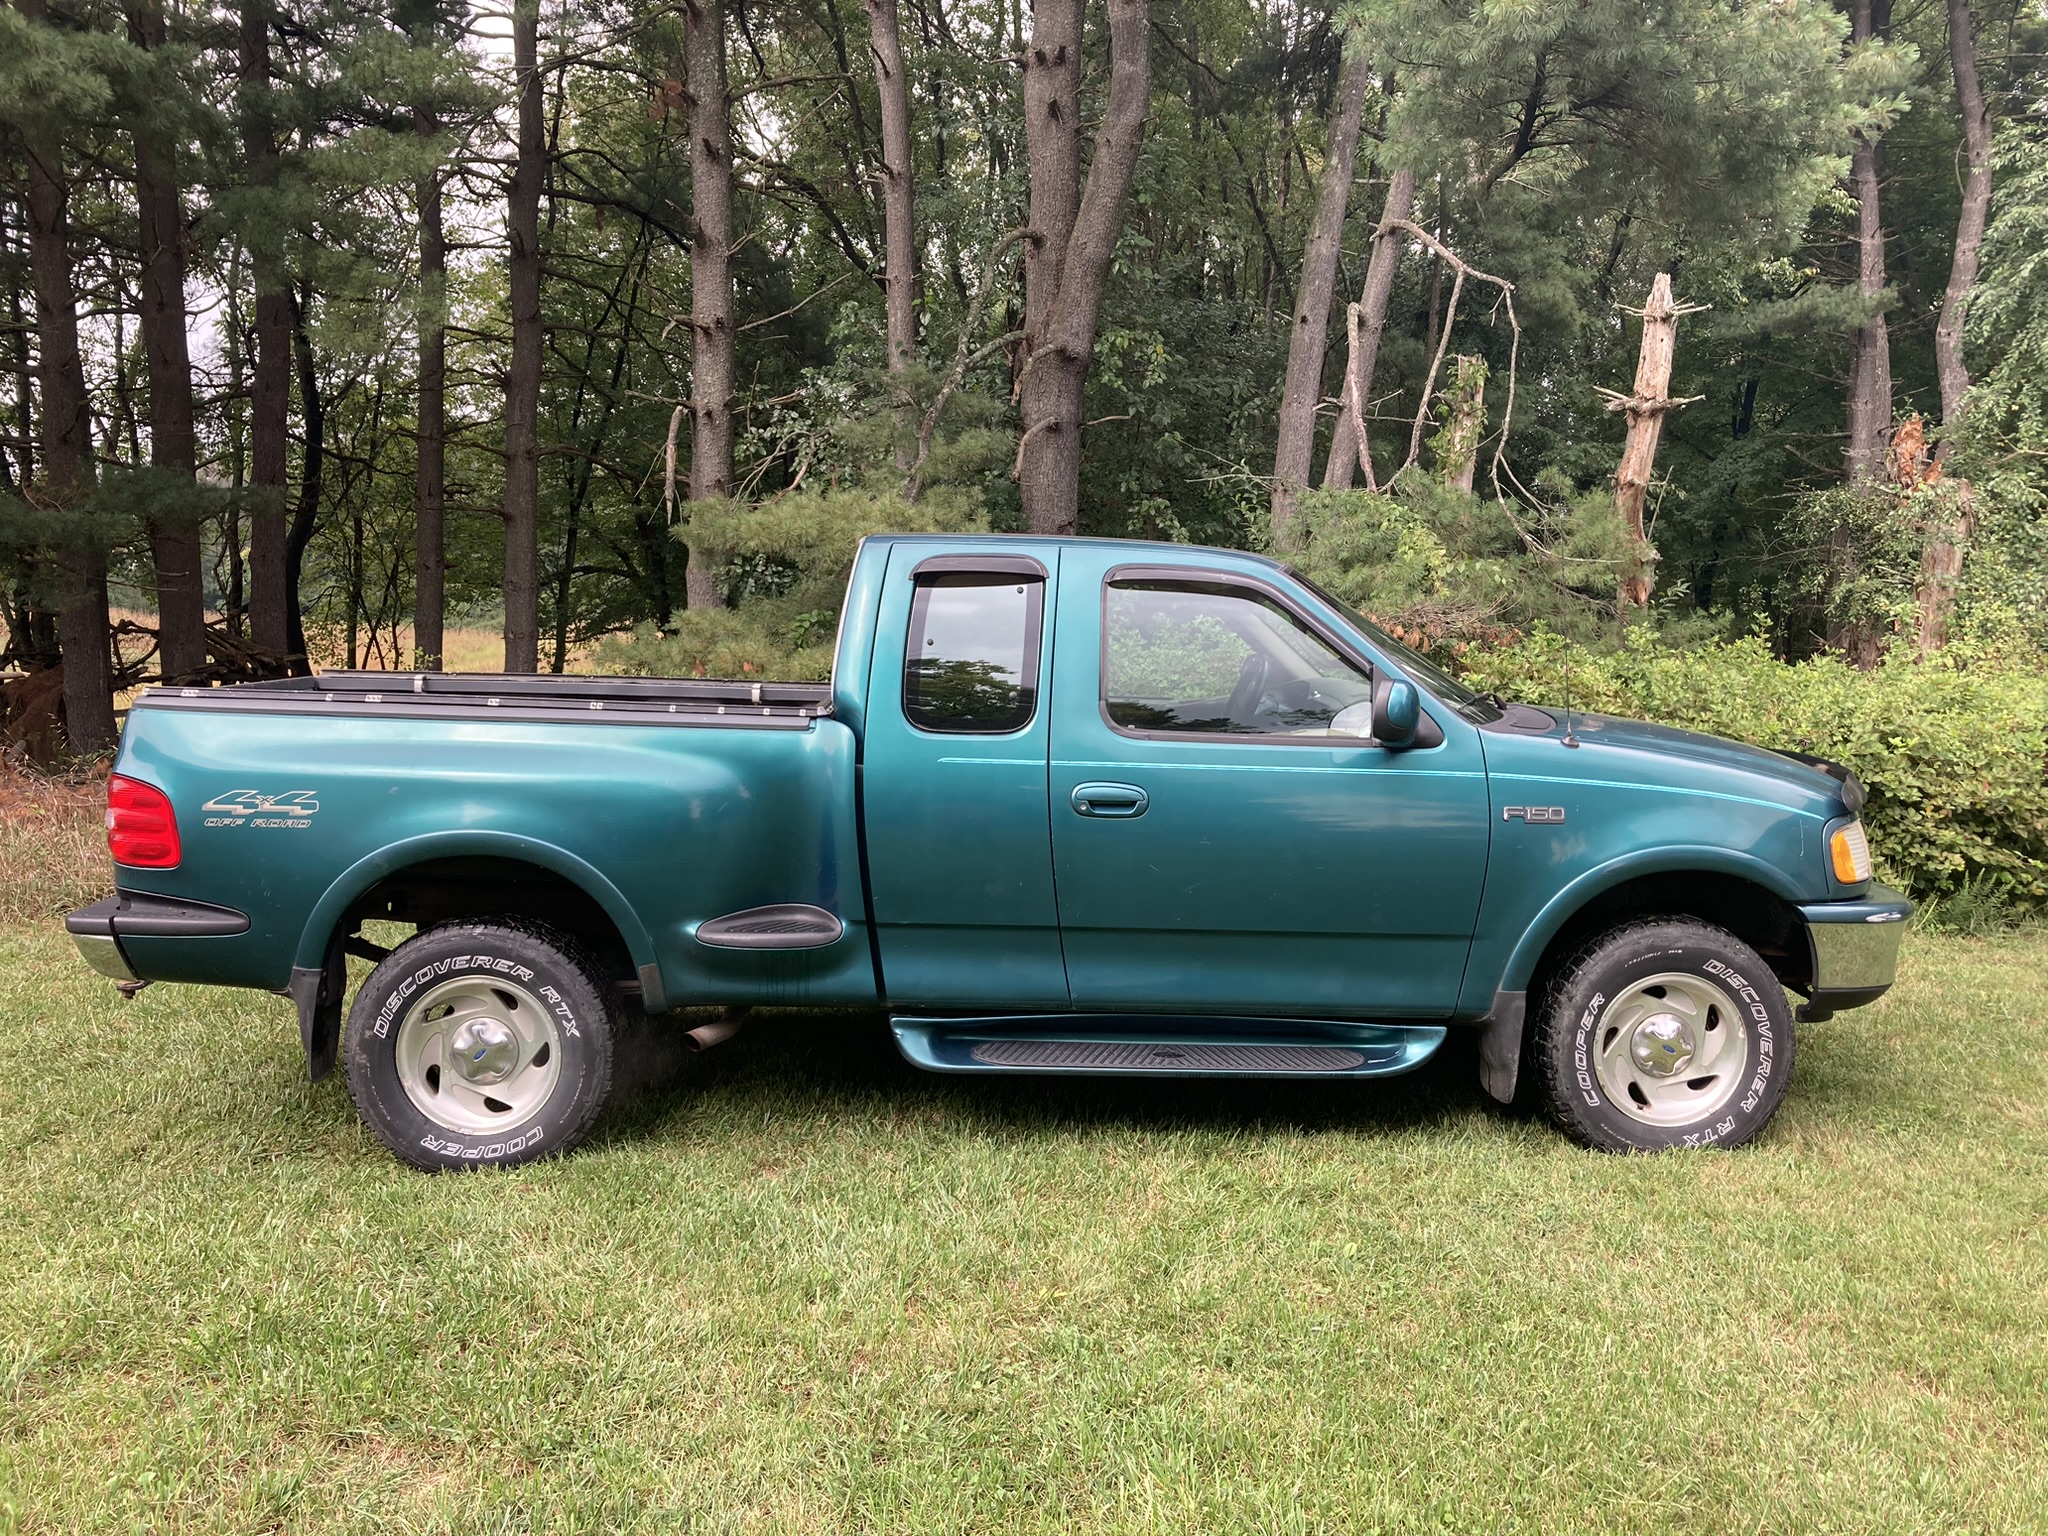 Used 1997 Ford F-150 Trucks for Sale Near Me | Cars.com